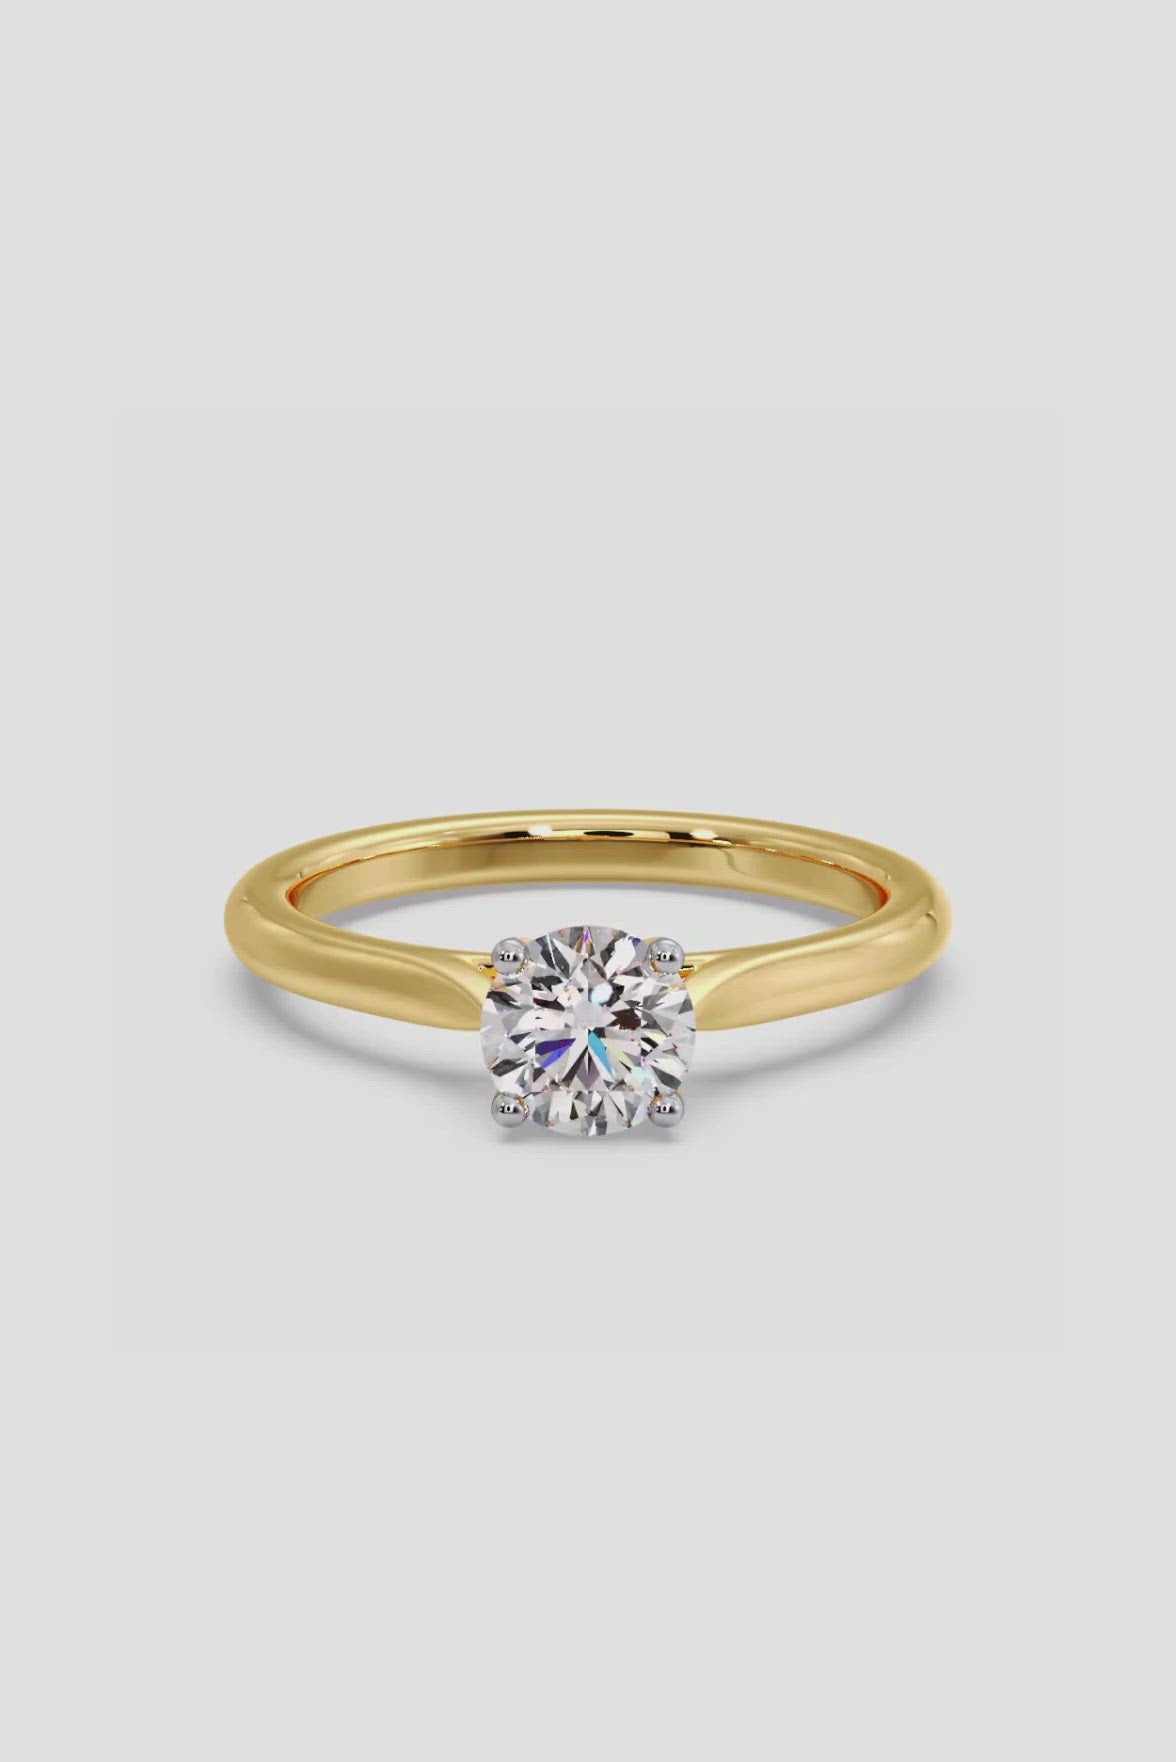 1 ct Solitaire Ring